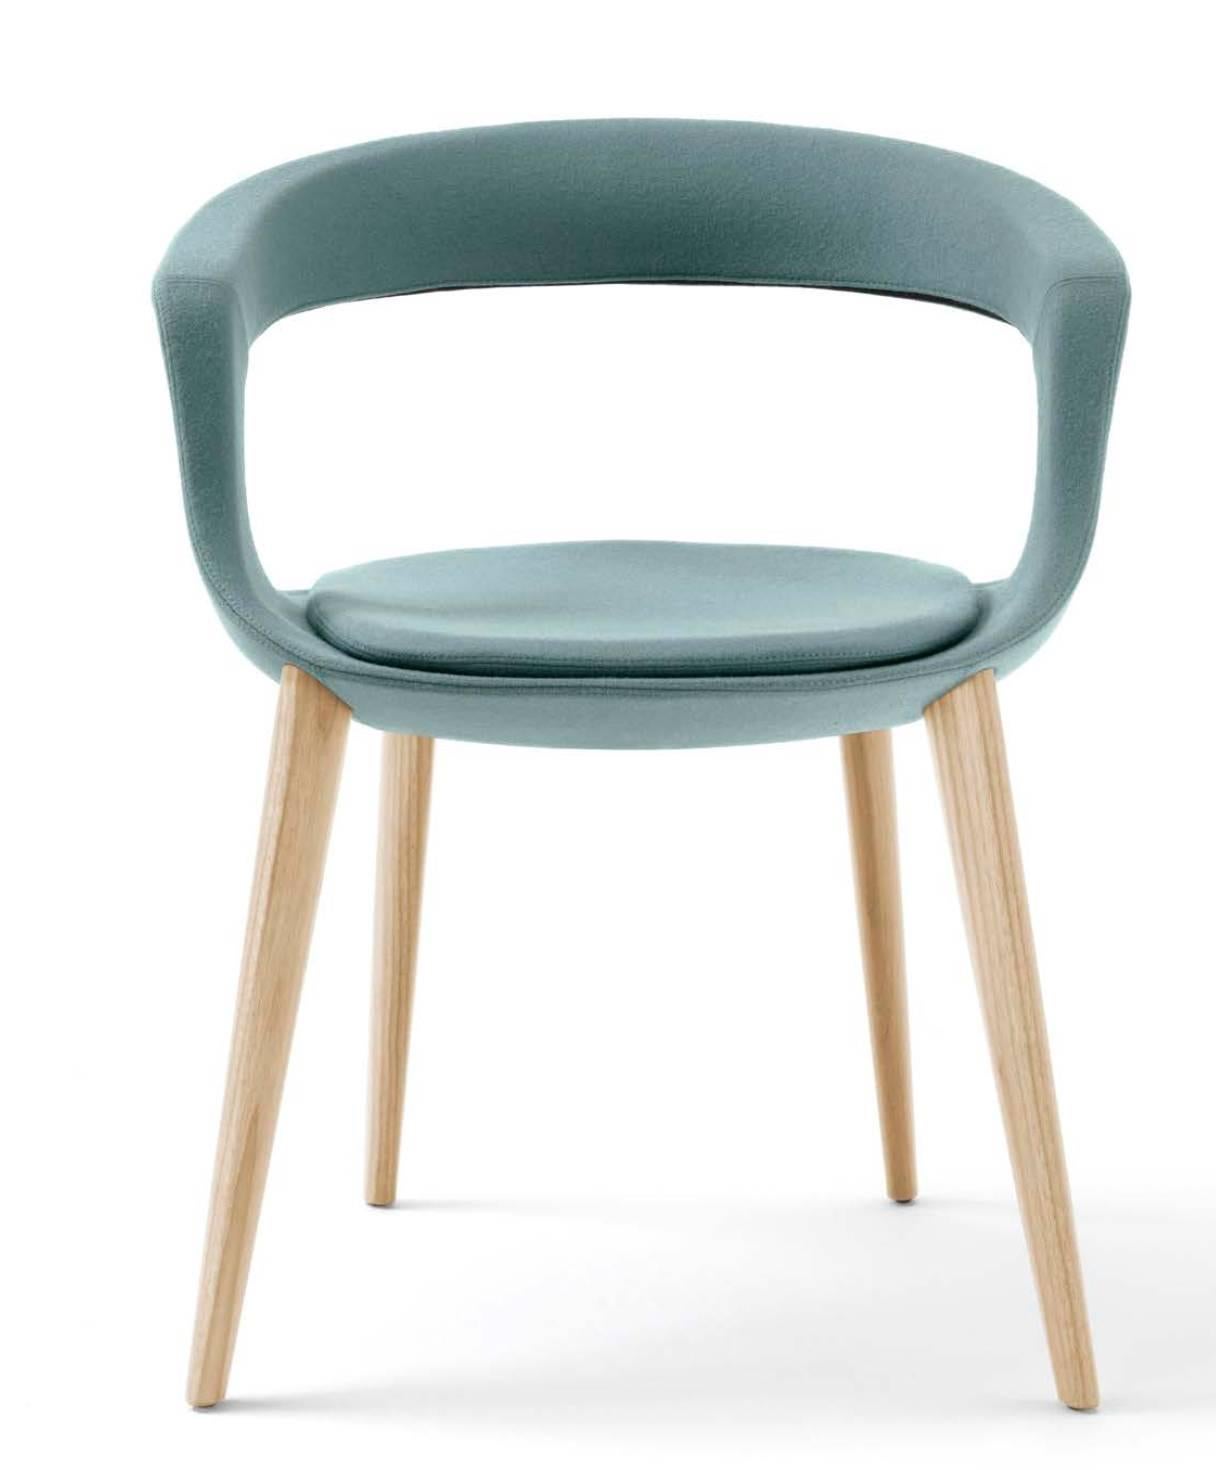 Italian modern dining room chair made of wood legs in Canaletto walnut or ash and soft leather upholstery, inner steel frame, expanded polyurethane padding. Upholstery can also be in felt, or technical material. Available with a low back (shown in